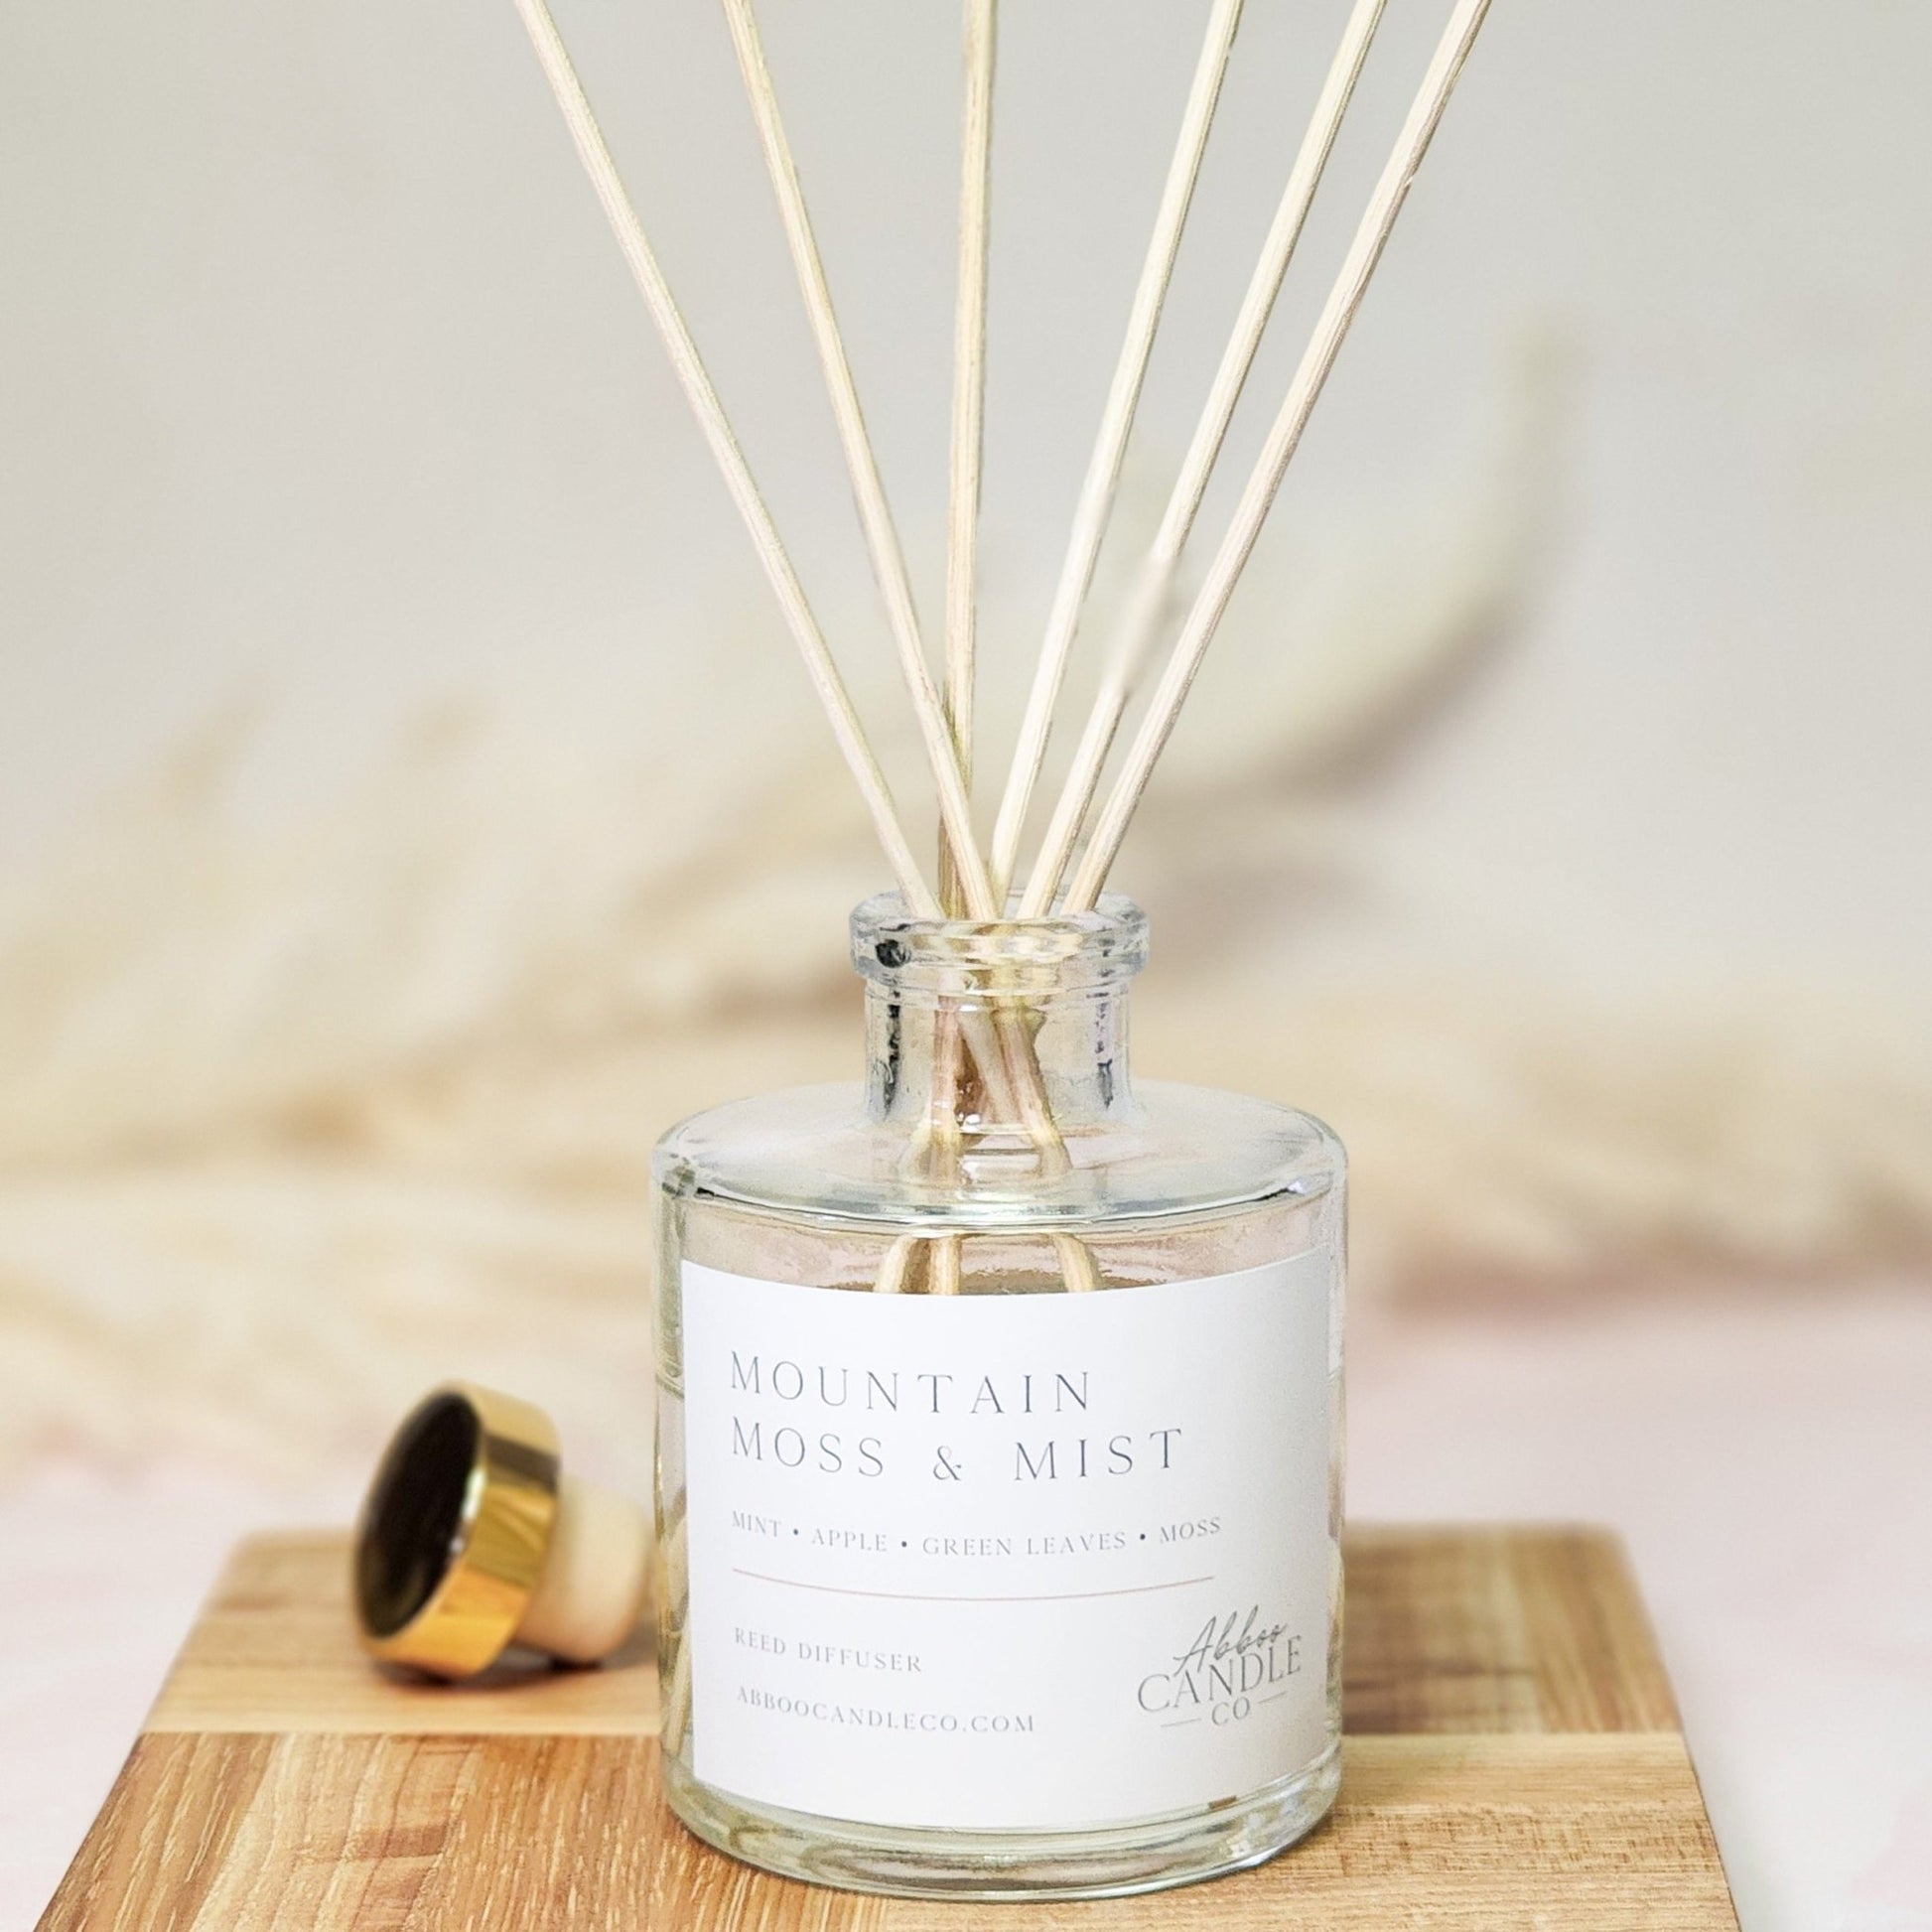 Mountain Moss and Mist Reed Diffuser - Abboo Candle Co